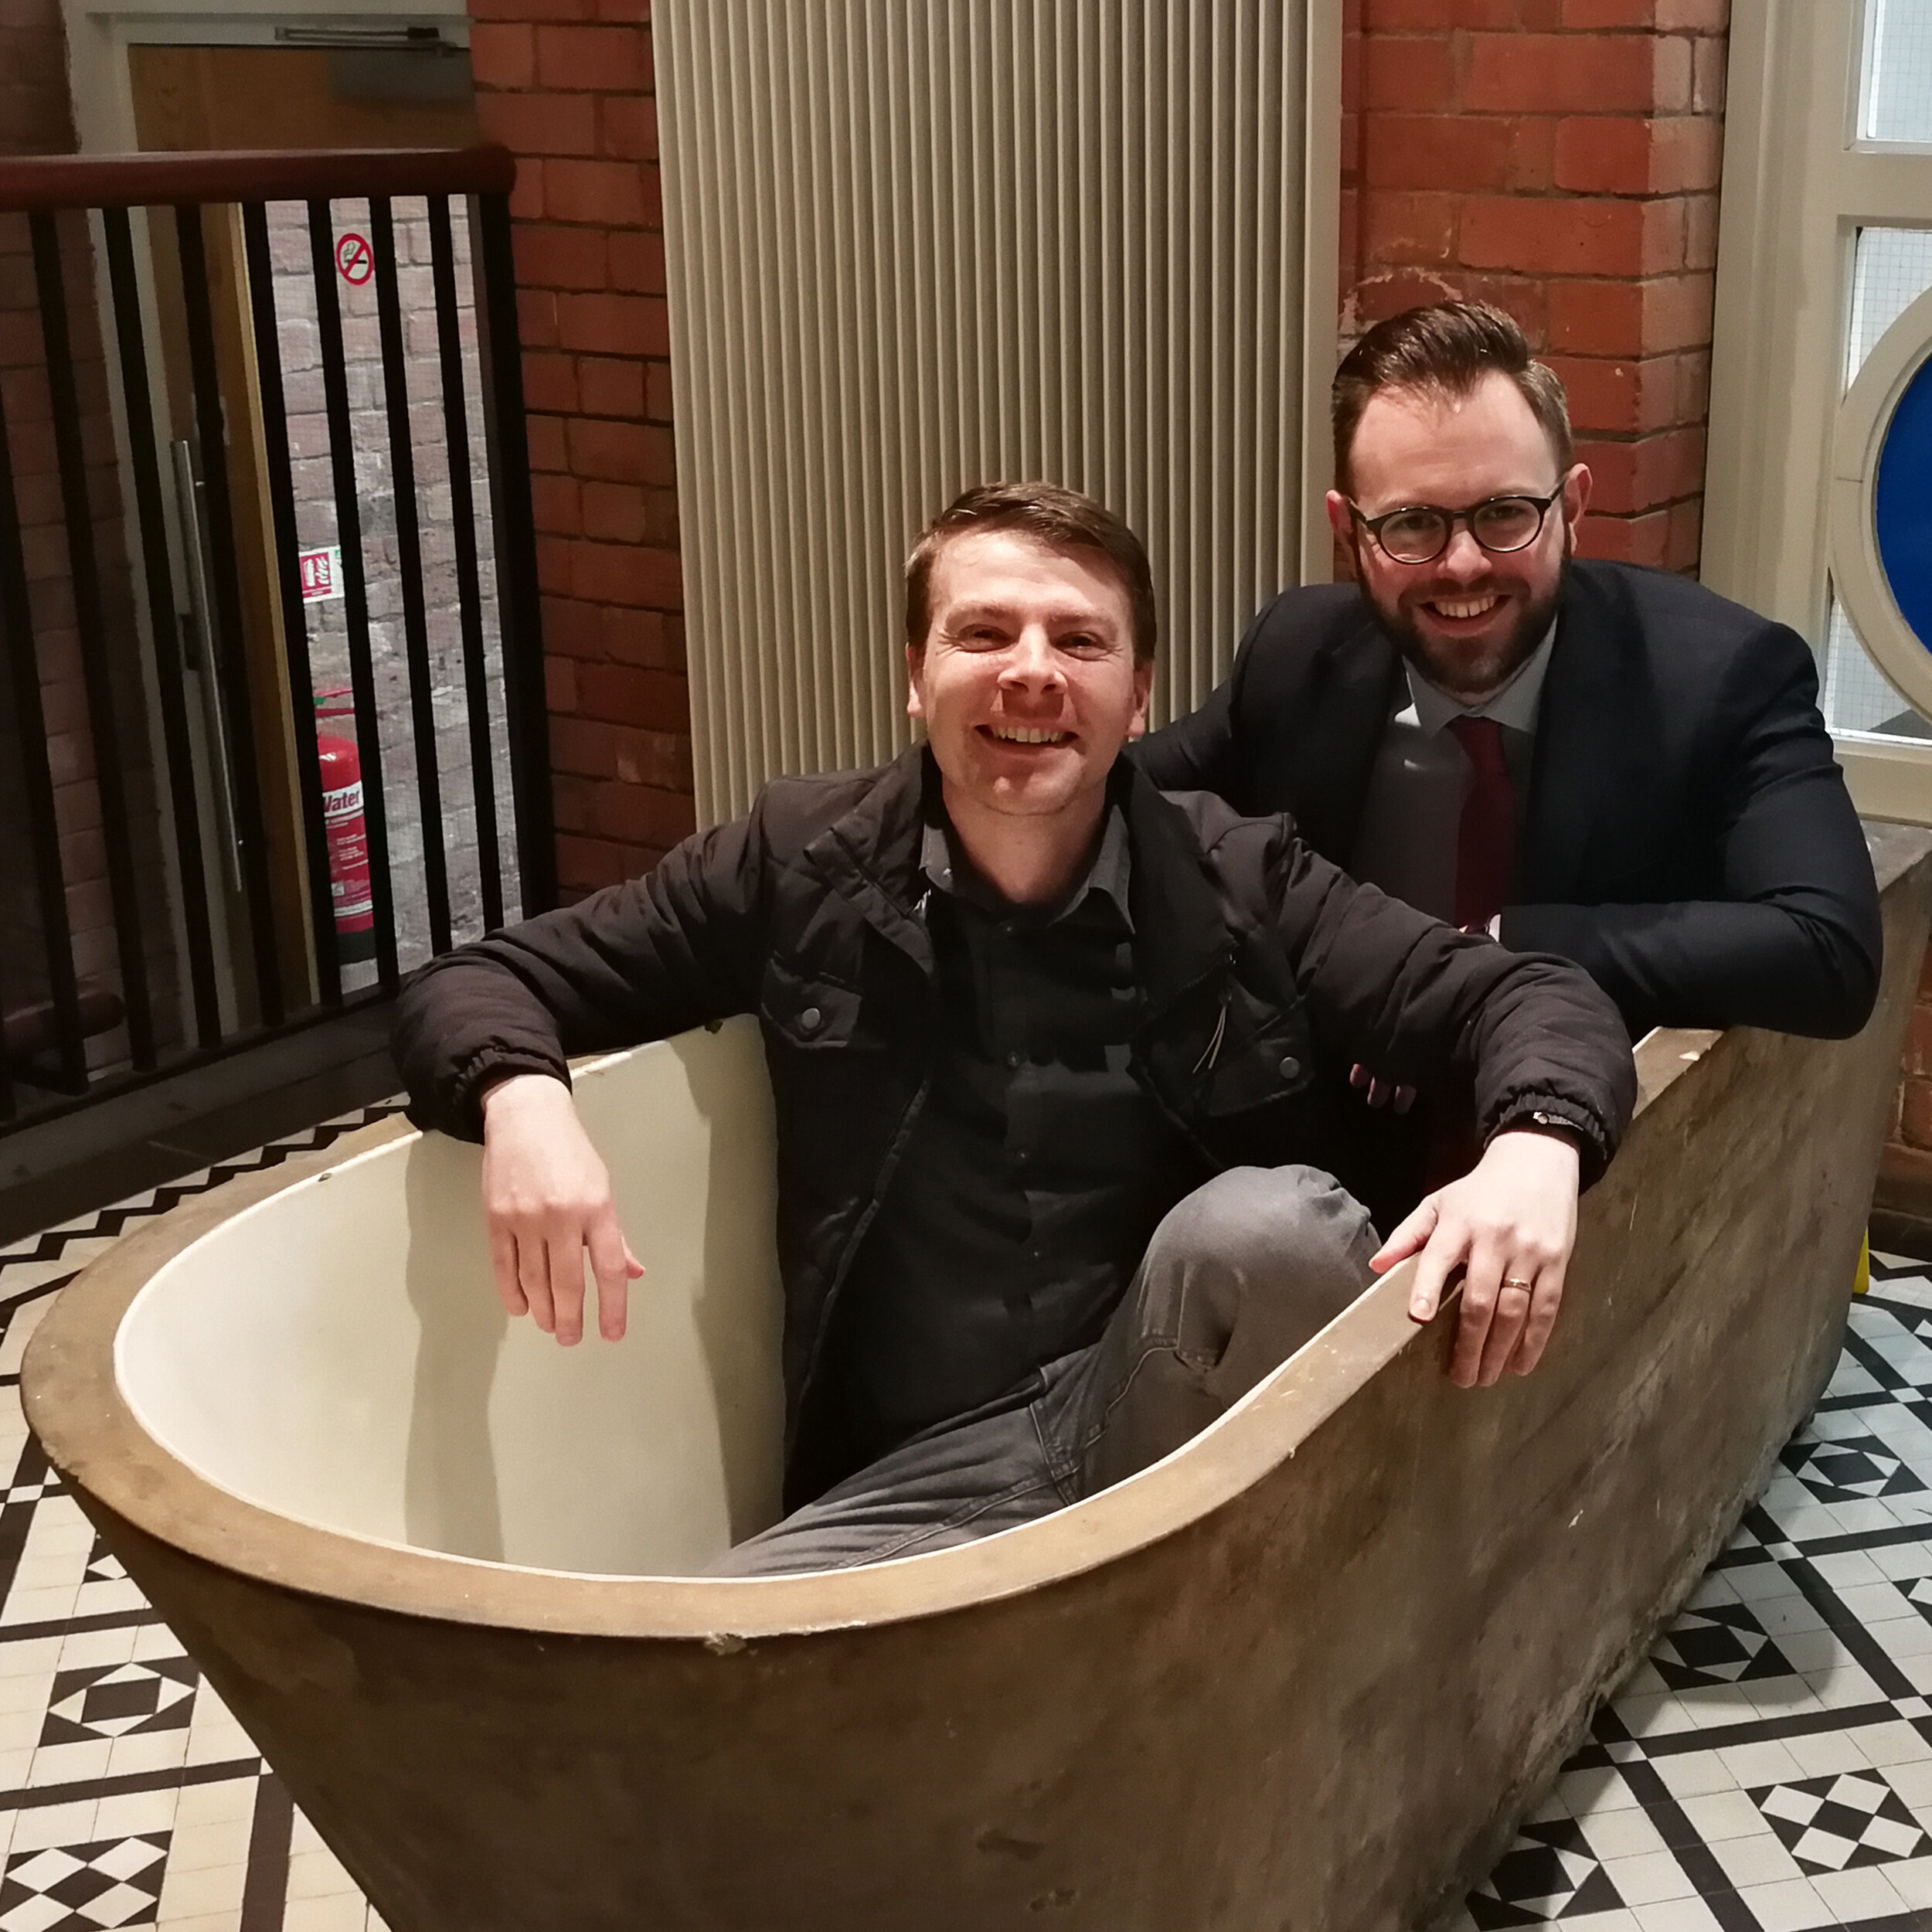 Three Men In A Tub: Brendan And Shane From Successful Belfast